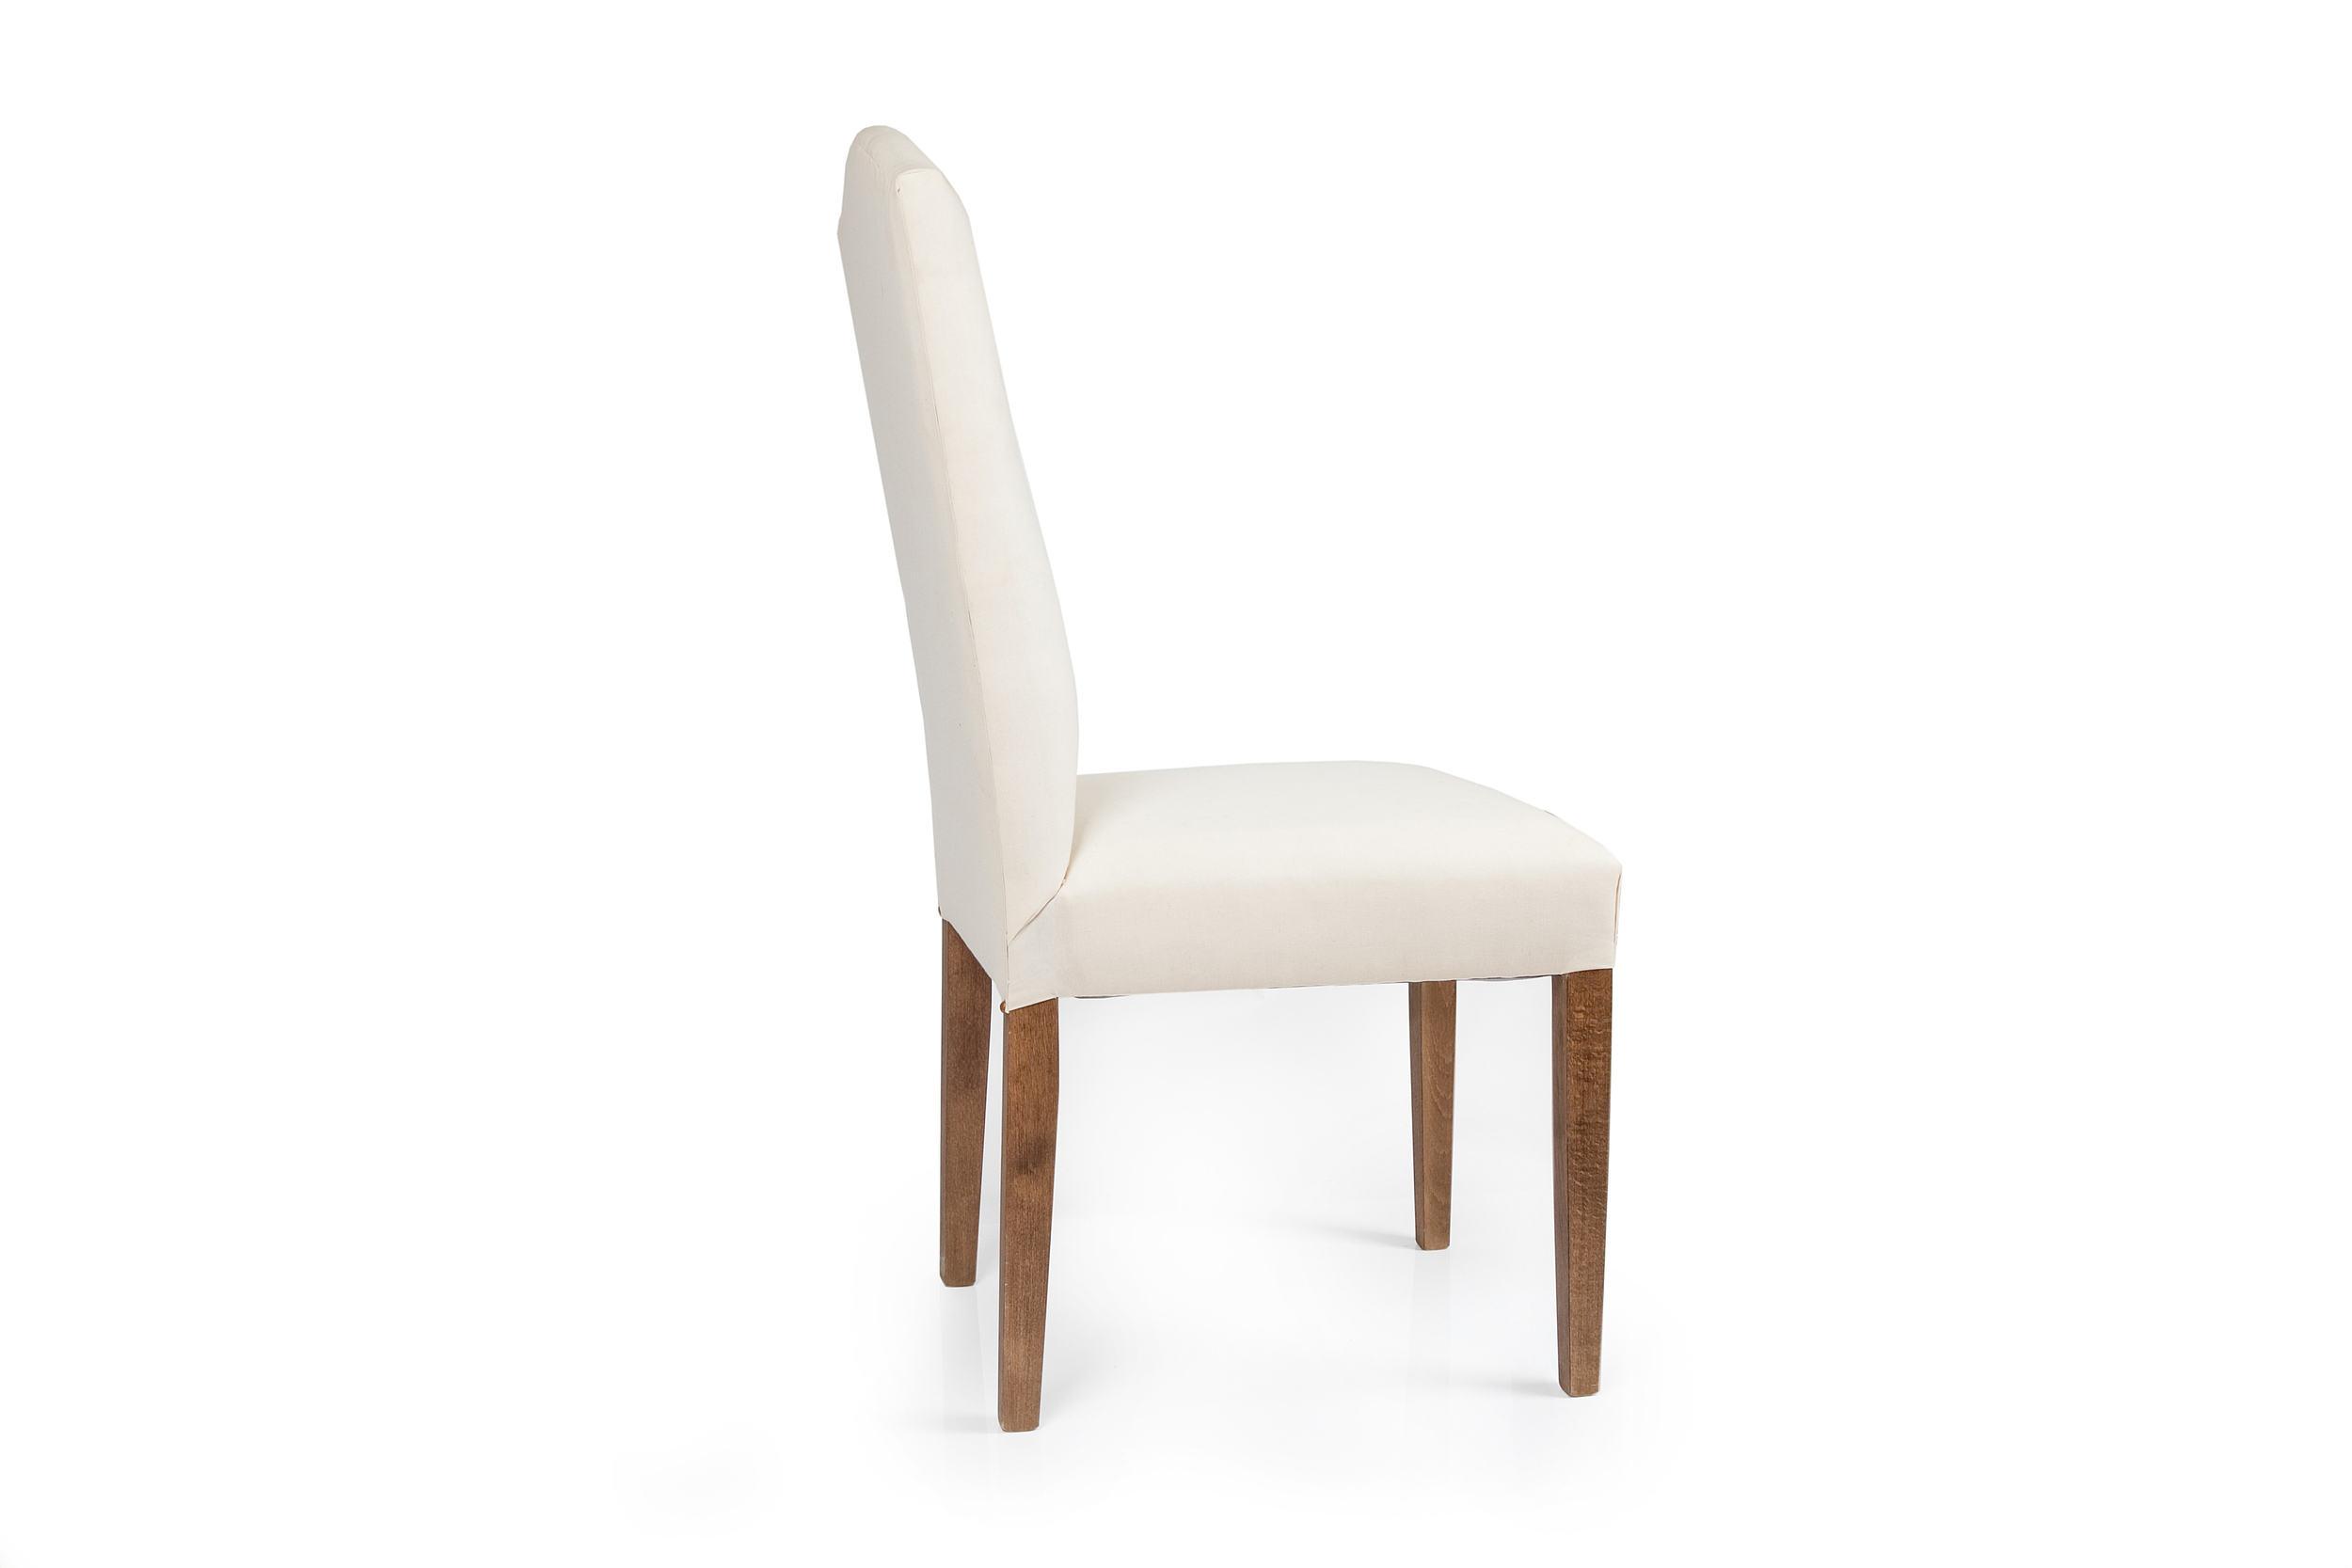  Classic Dining Chair in calico 